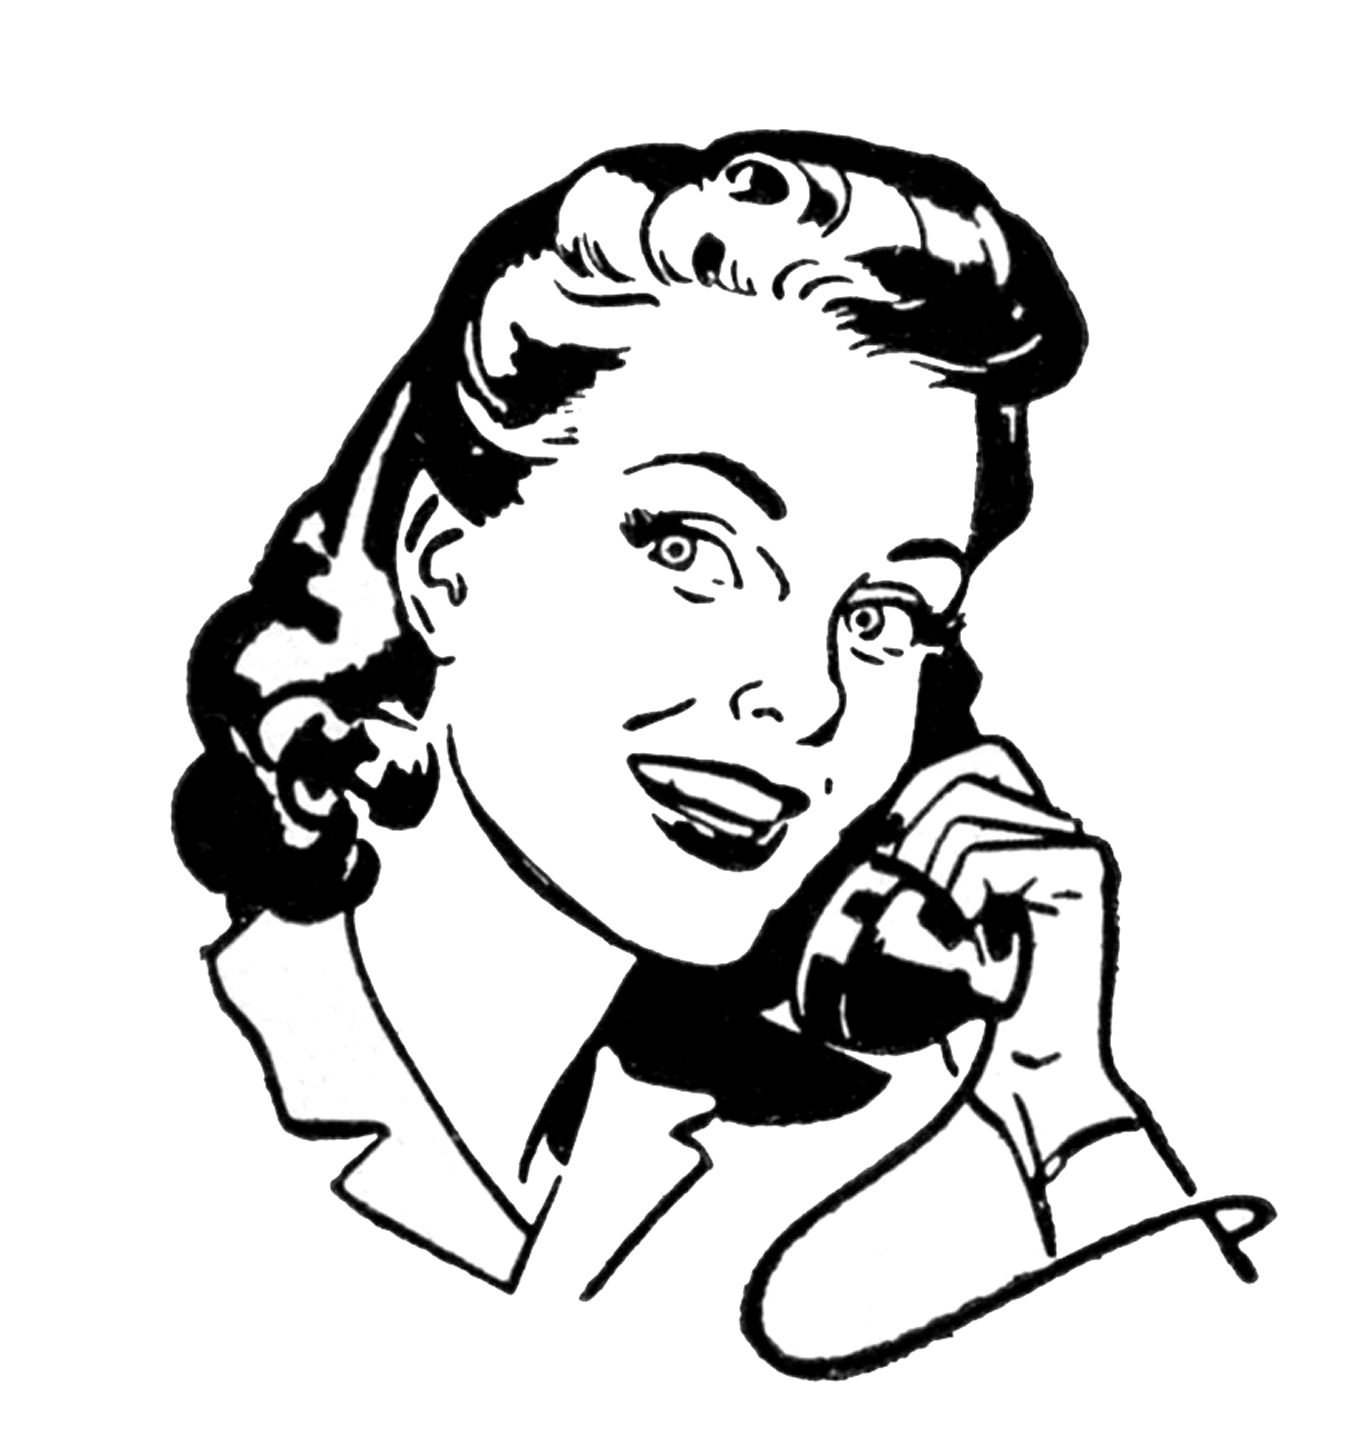 old phone clipart - photo #14